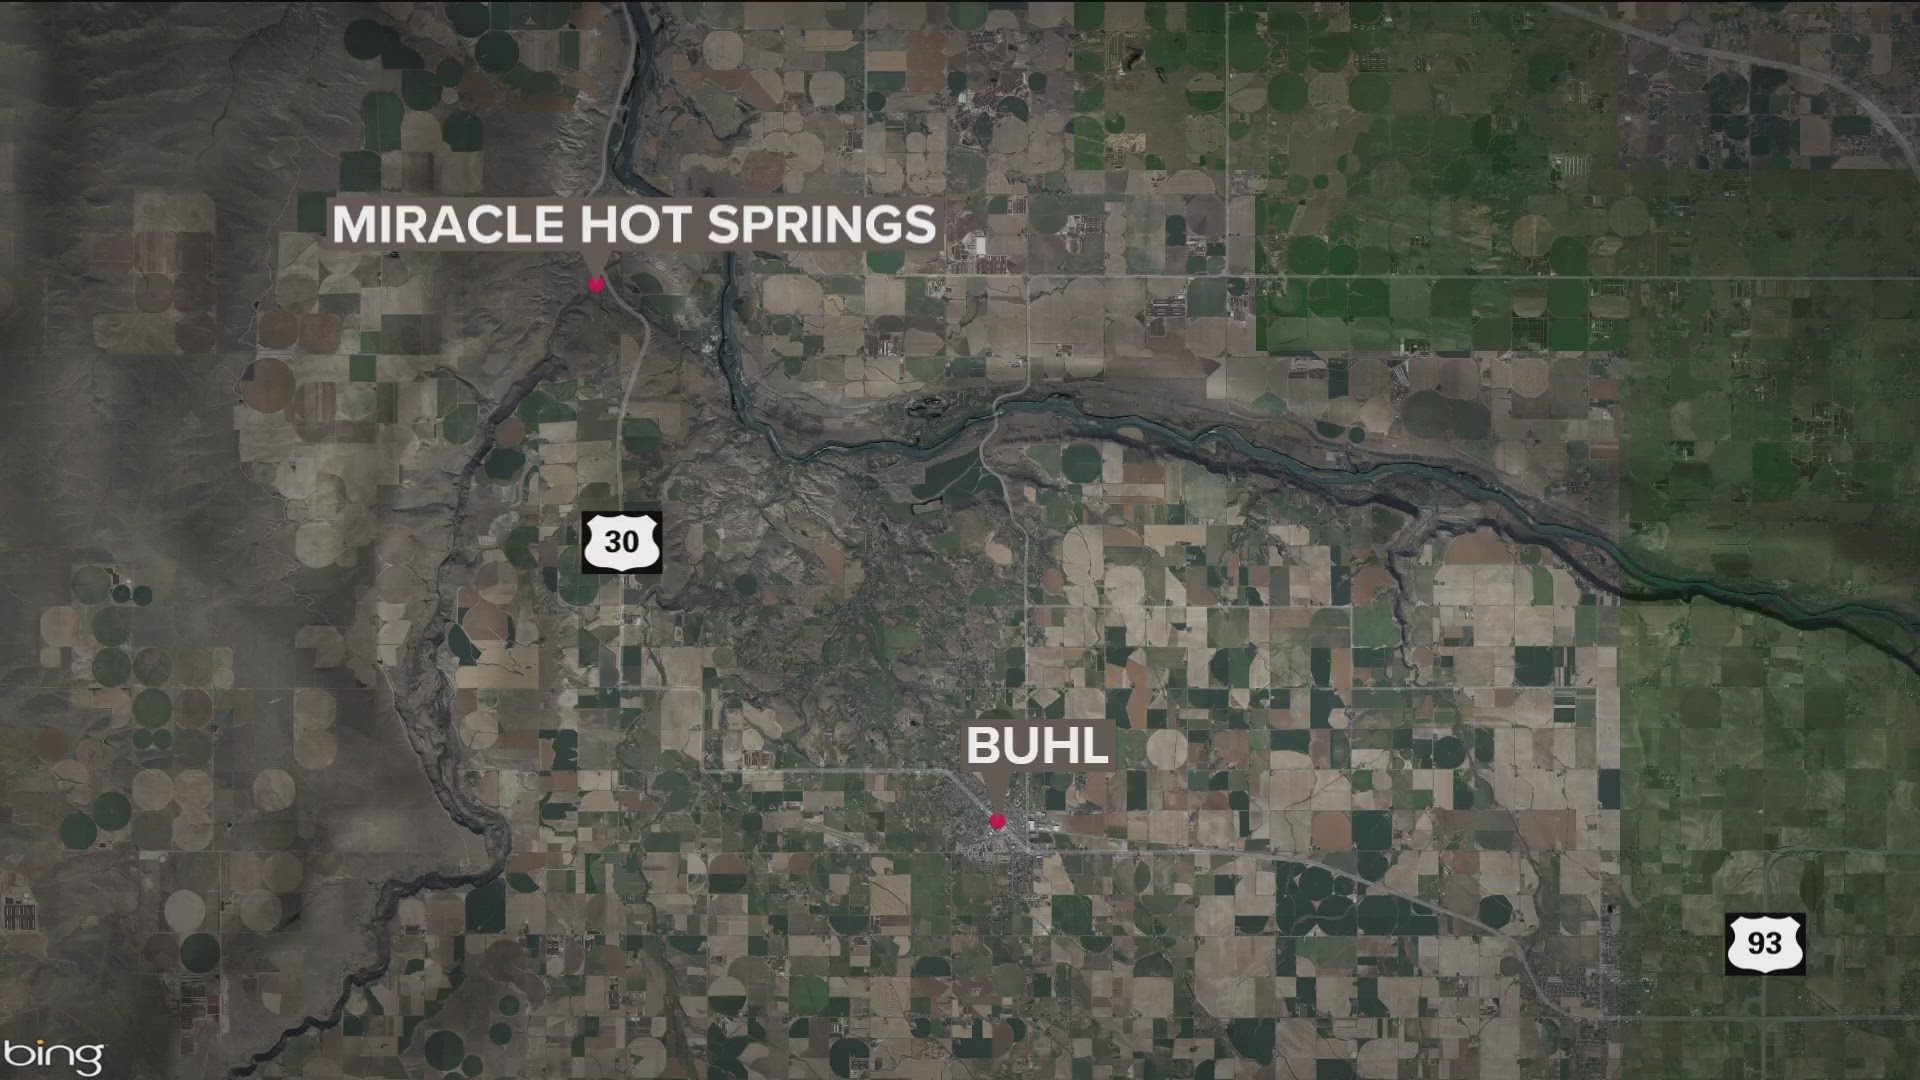 Couple found dead at Miracle Hot Springs in Twin Falls County